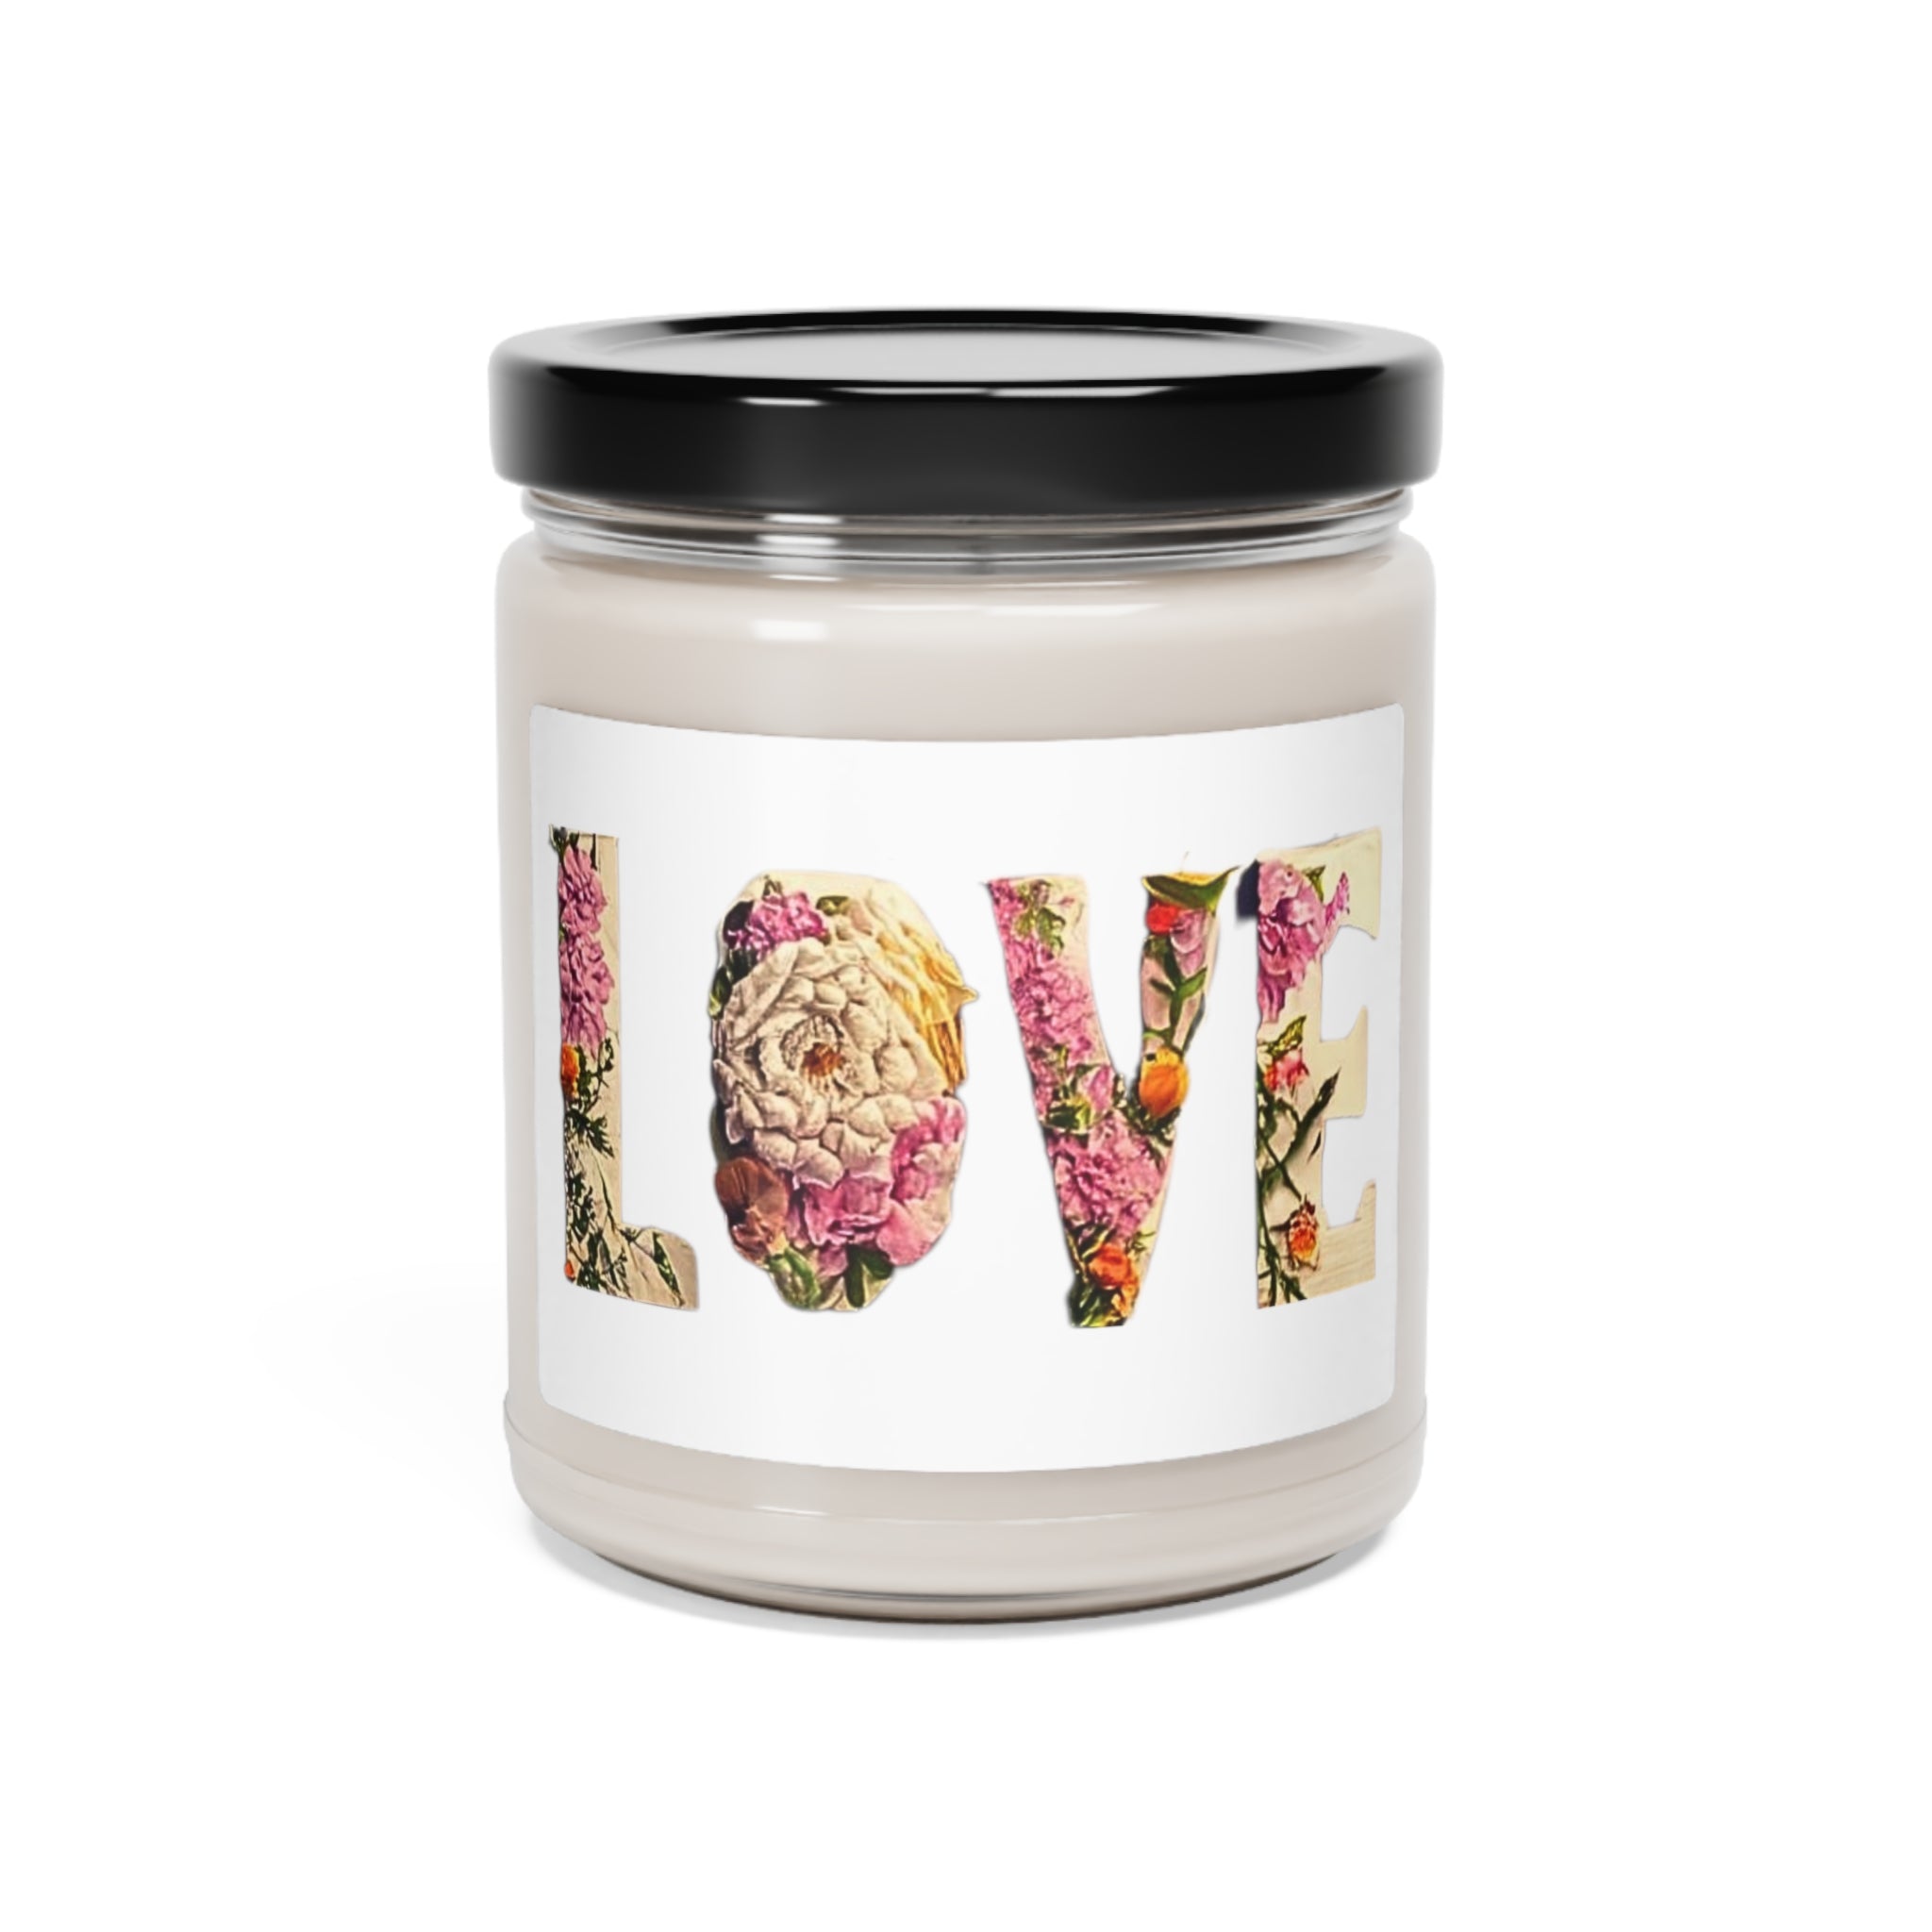 LOVE Scented Soy Candle, 9oz